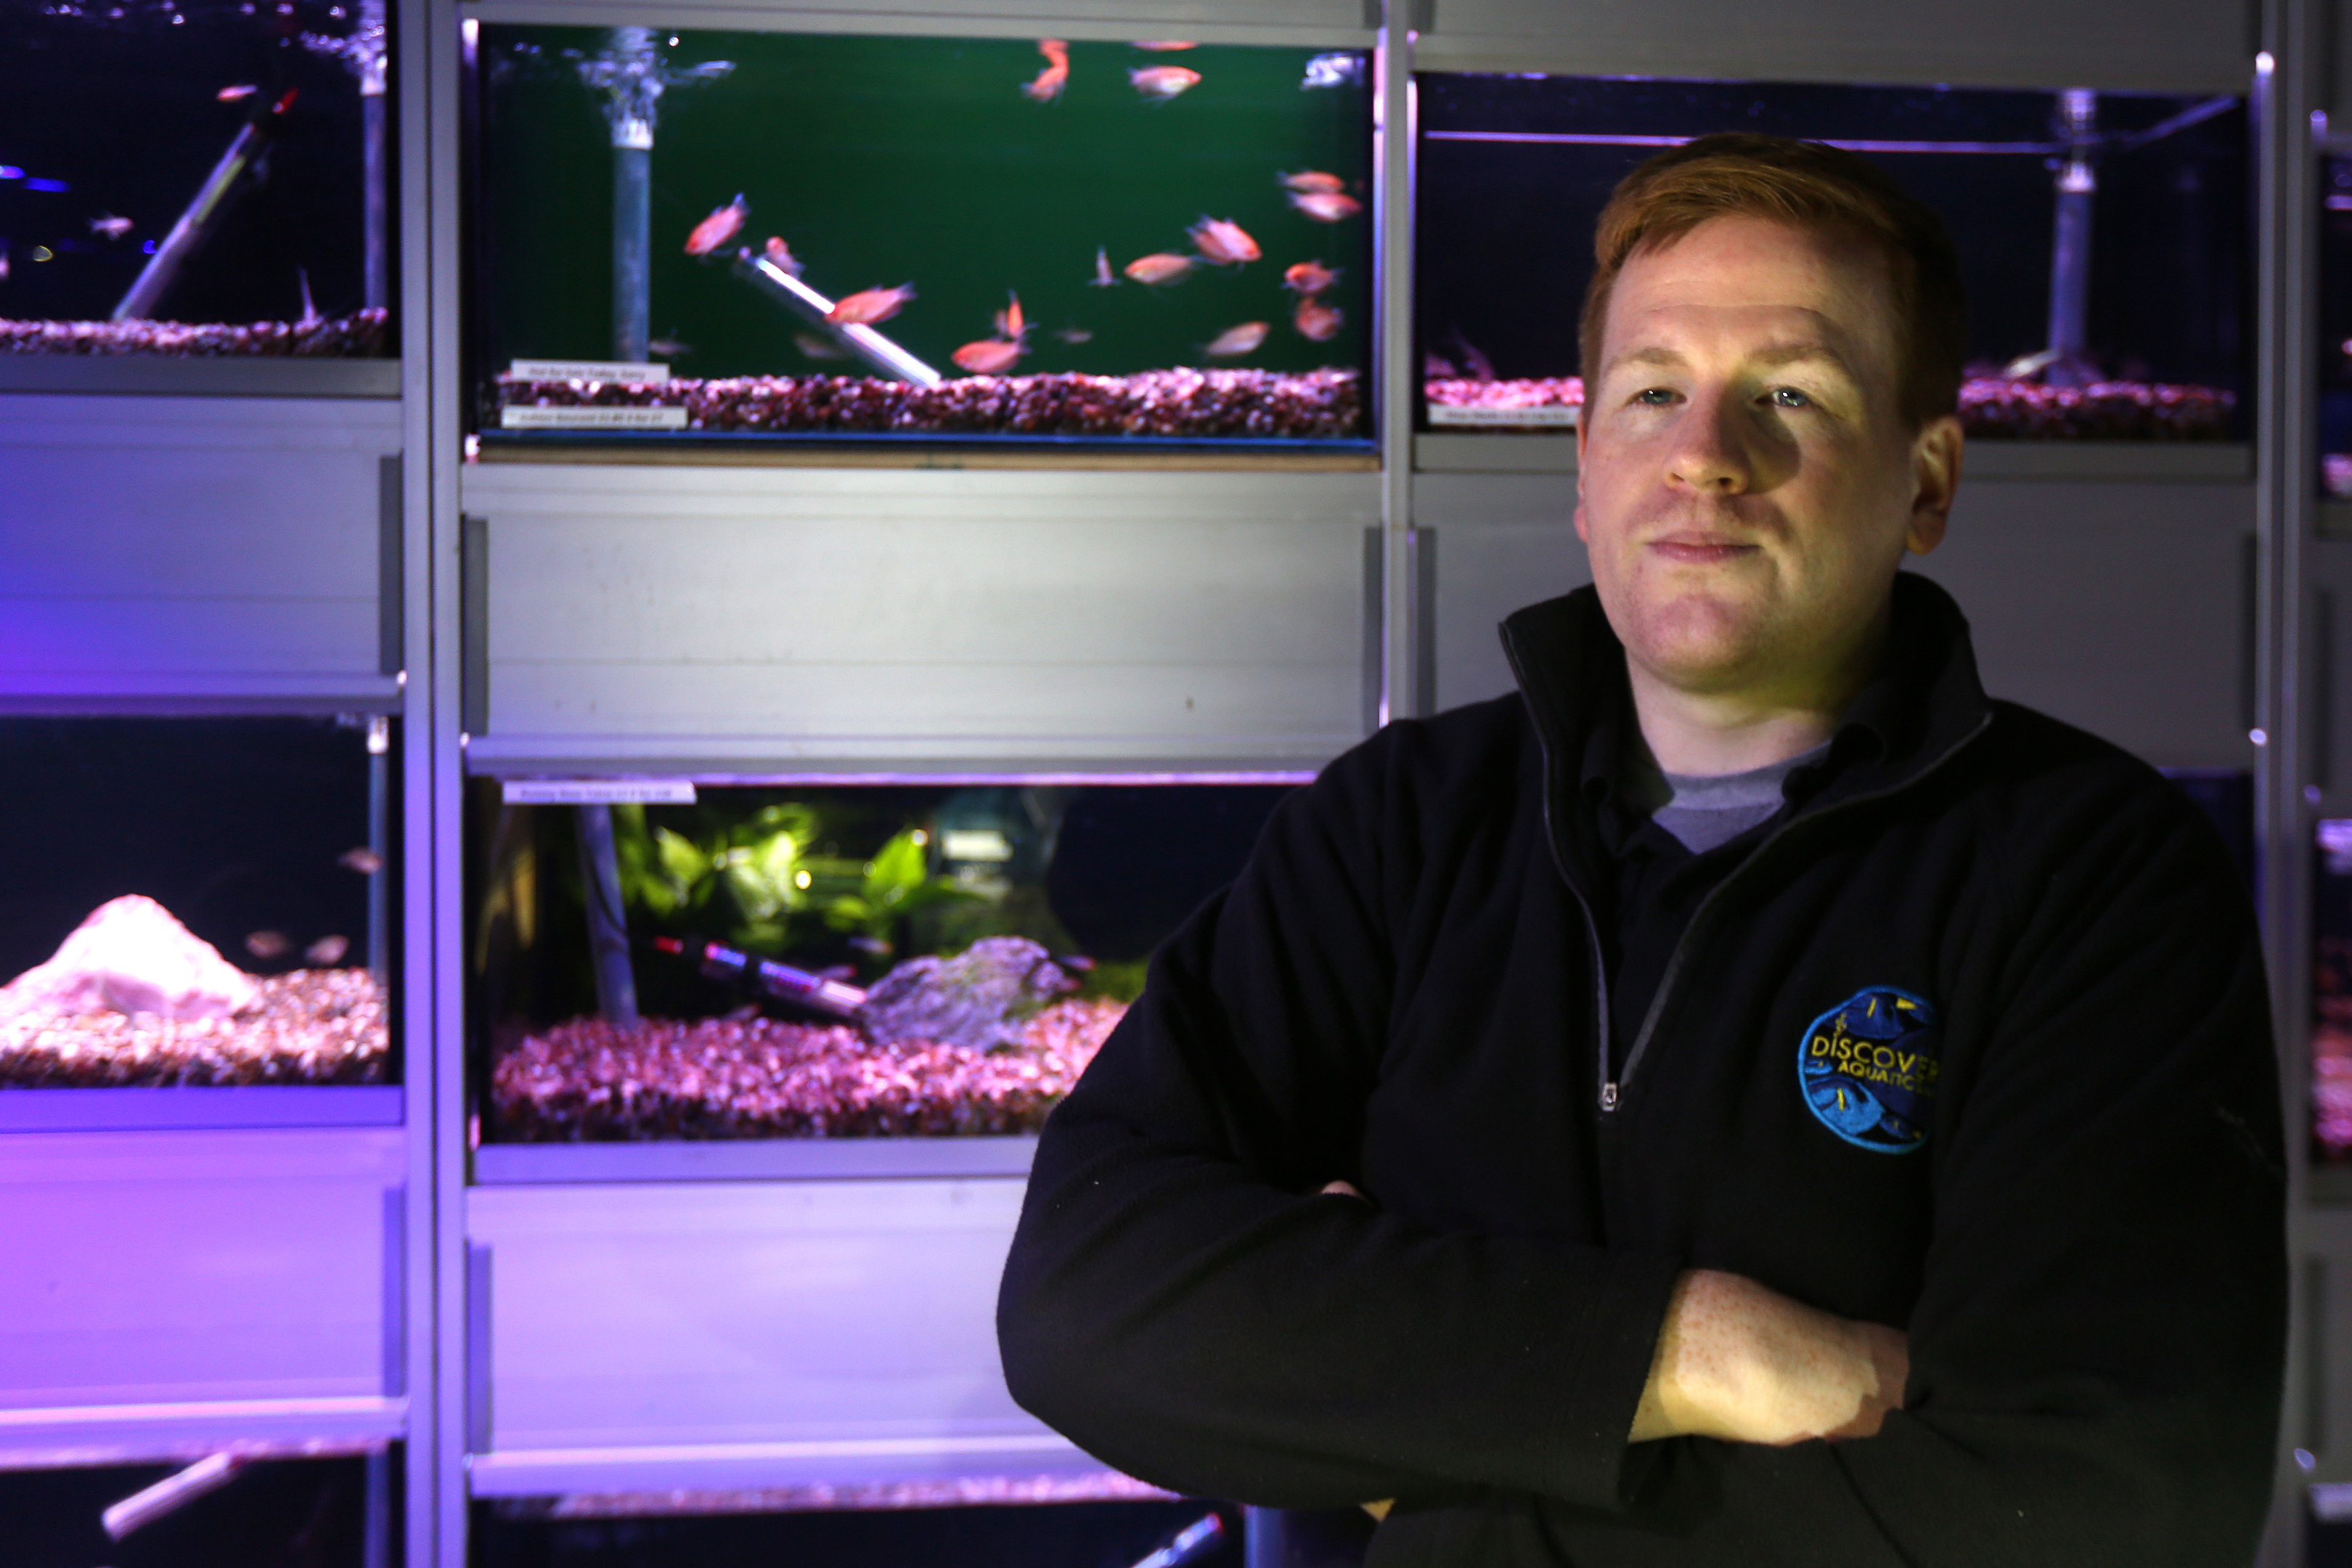 Kris Rennie with some of his fish tanks at Discovery Aquatics.